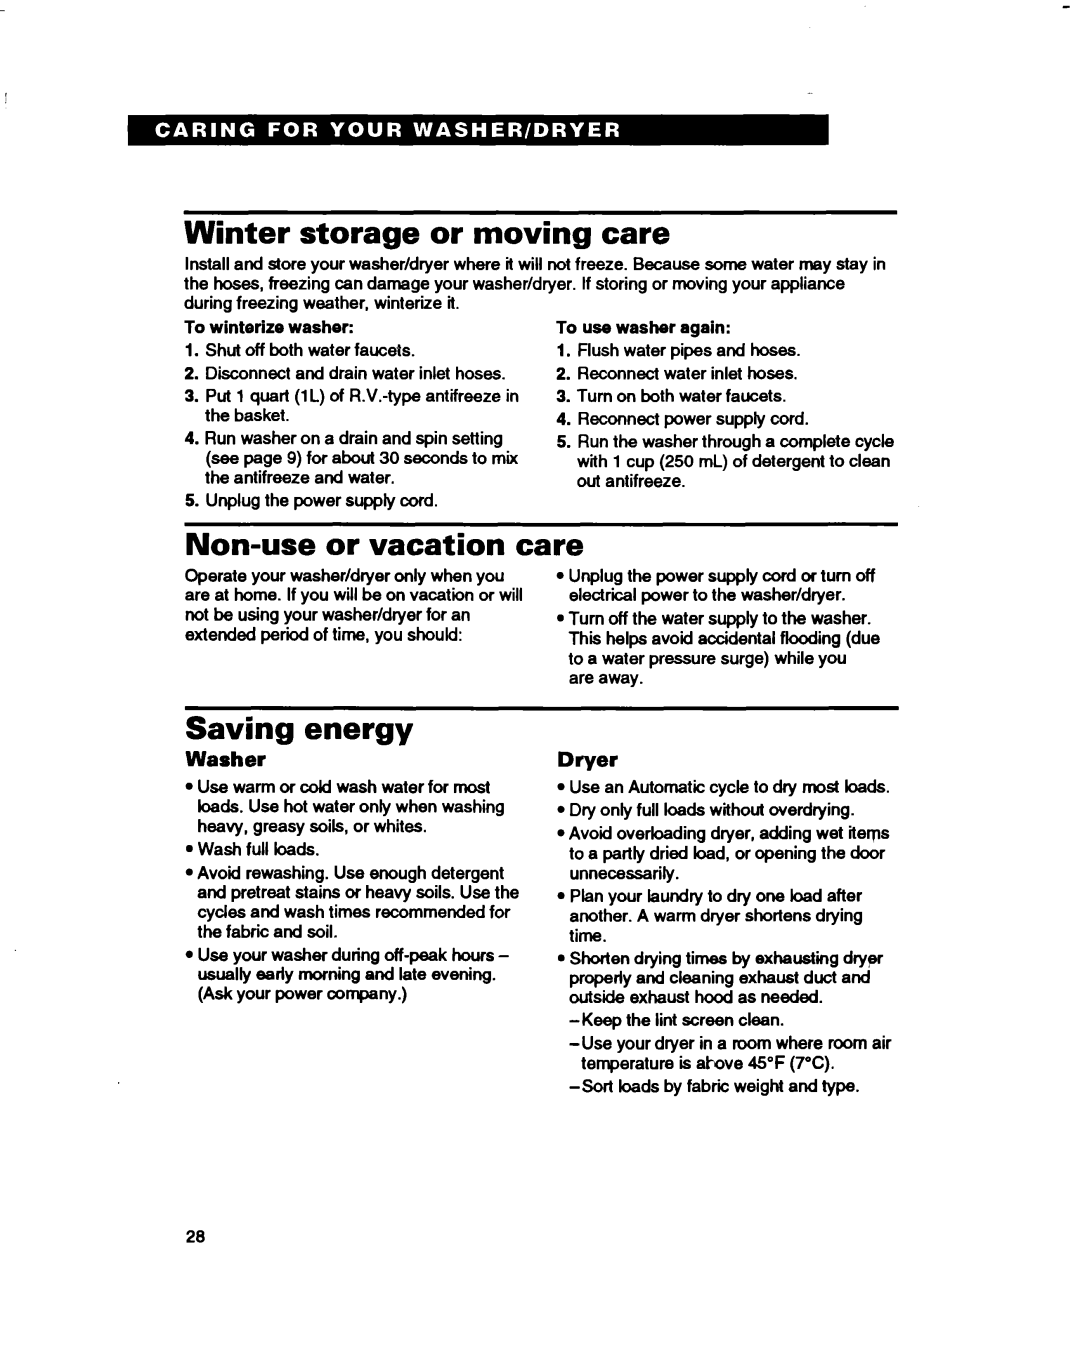 Whirlpool 3396314 warranty Winter storage or moving care, Non-use or vacation care, Saving energy, Washer, Dryer 